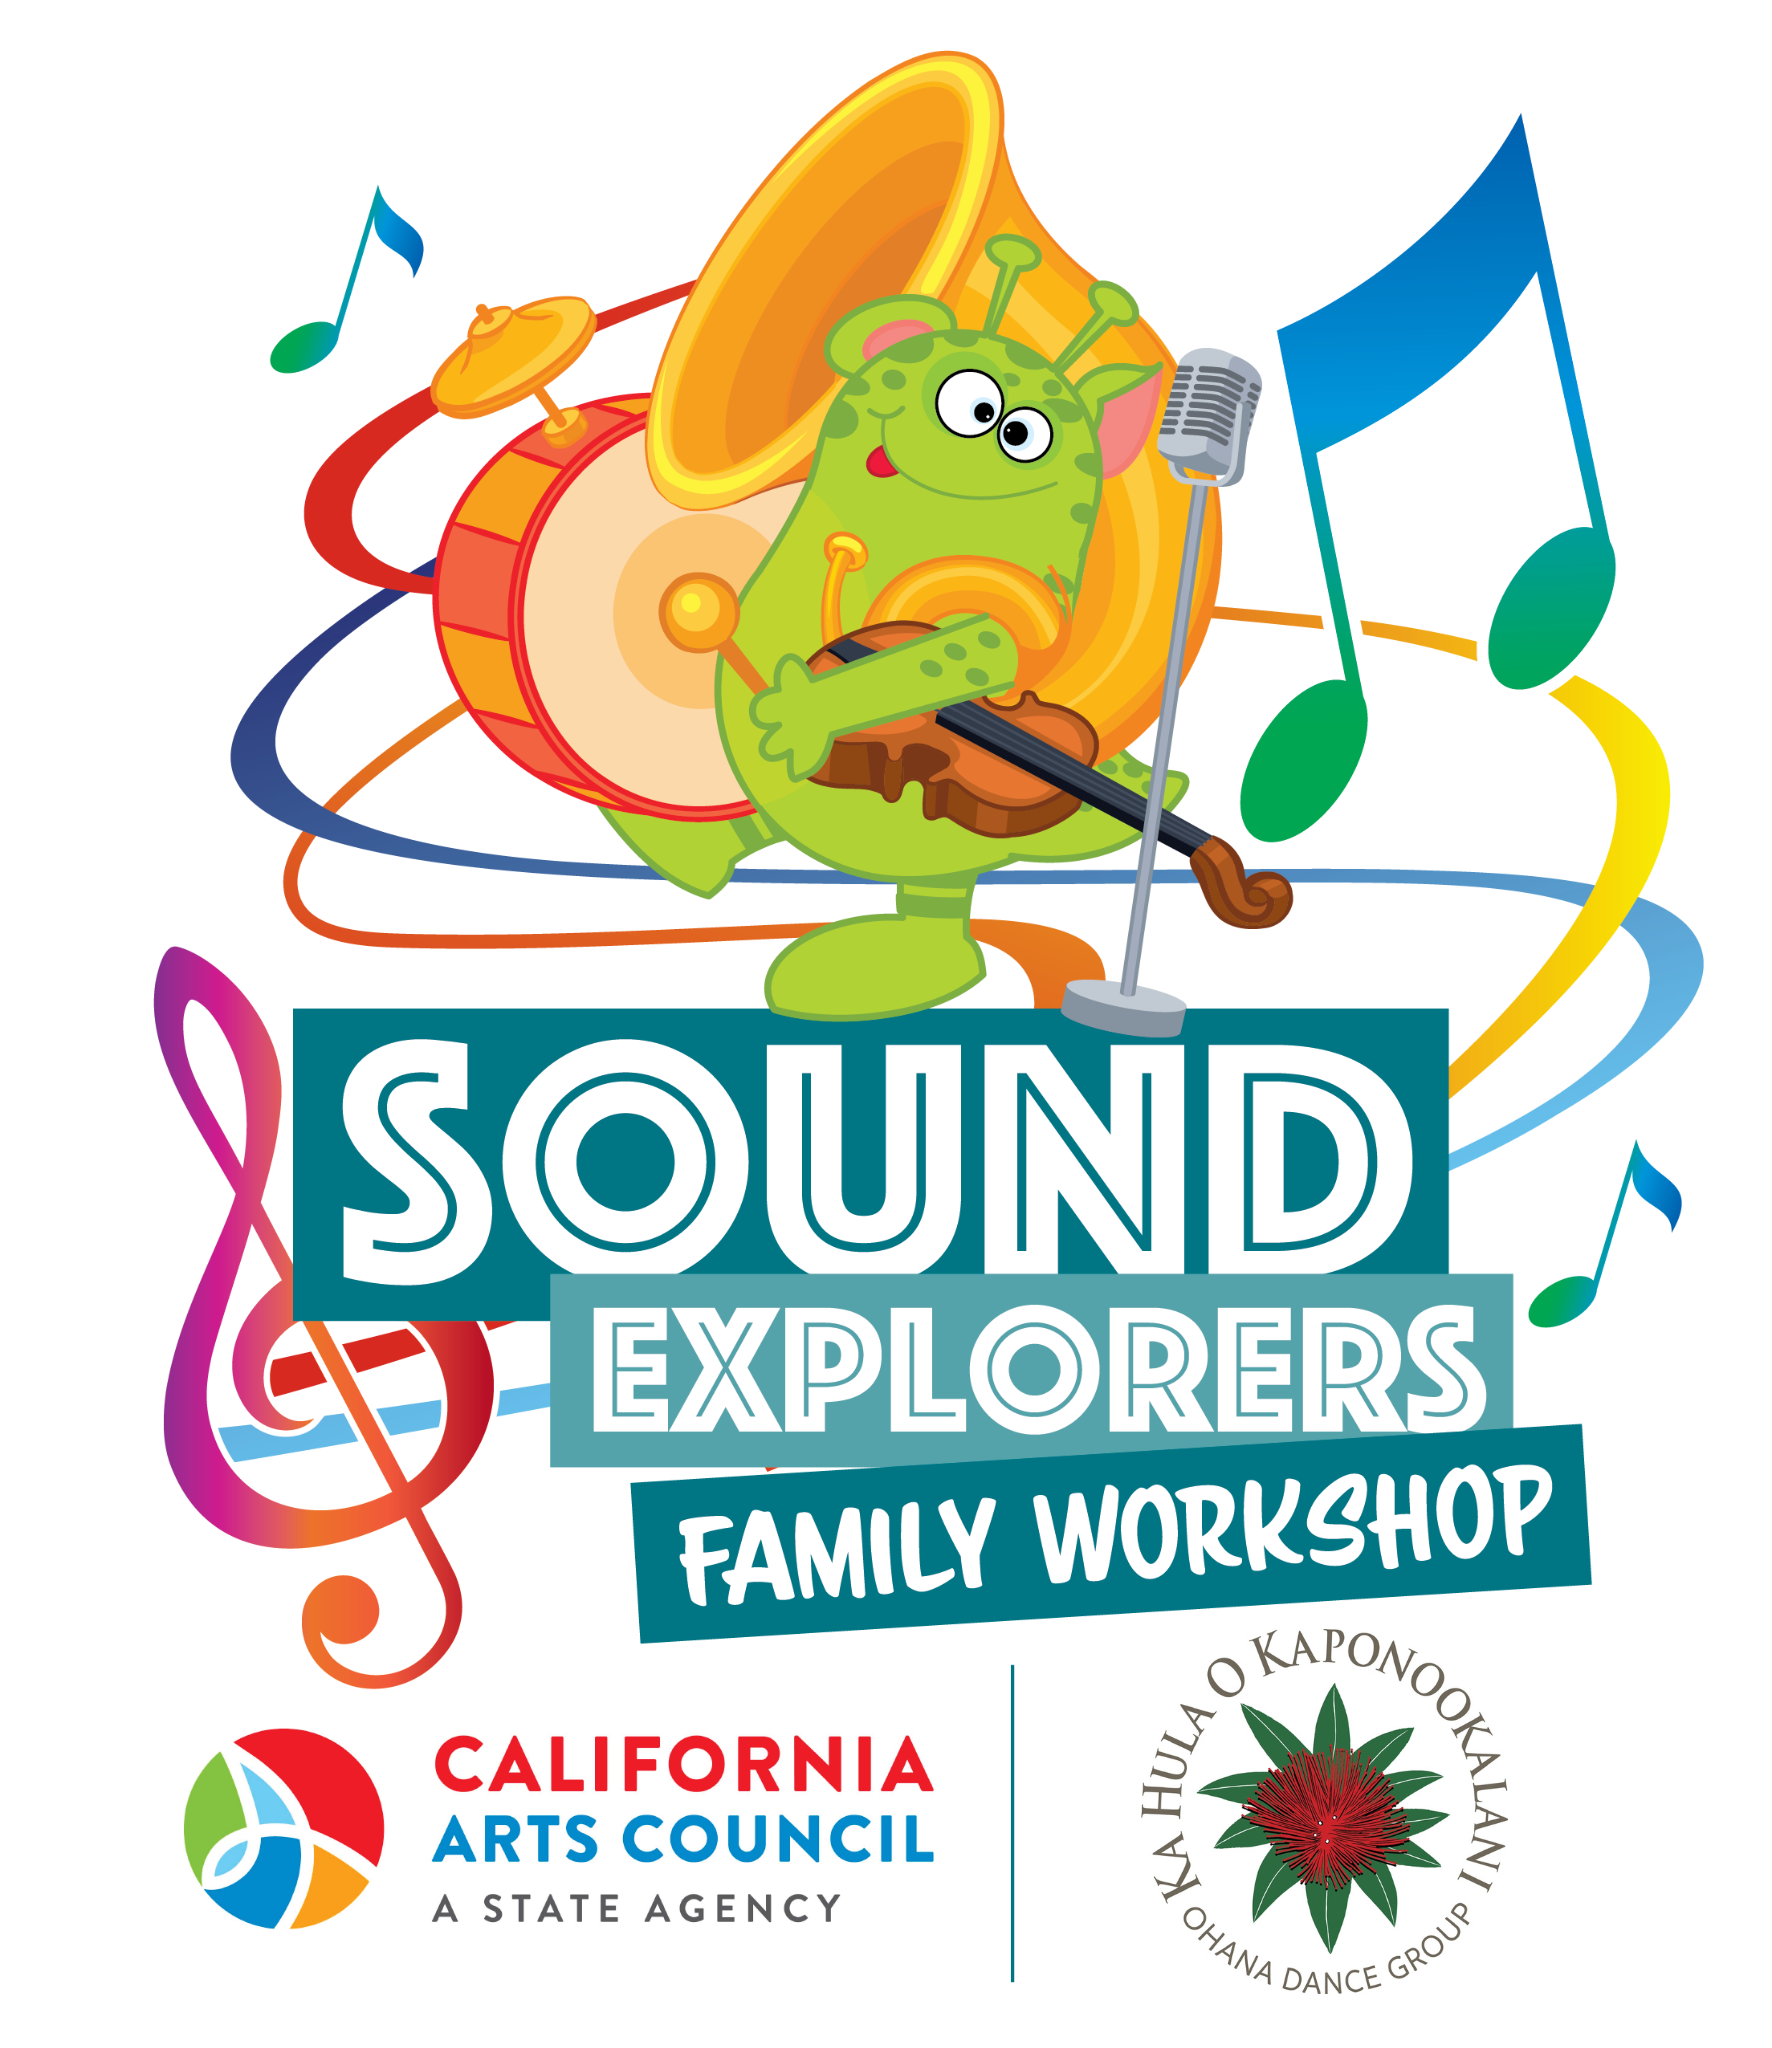 Sound Explorers Family Workshop logo over CA Council for the Arts and dance group logos